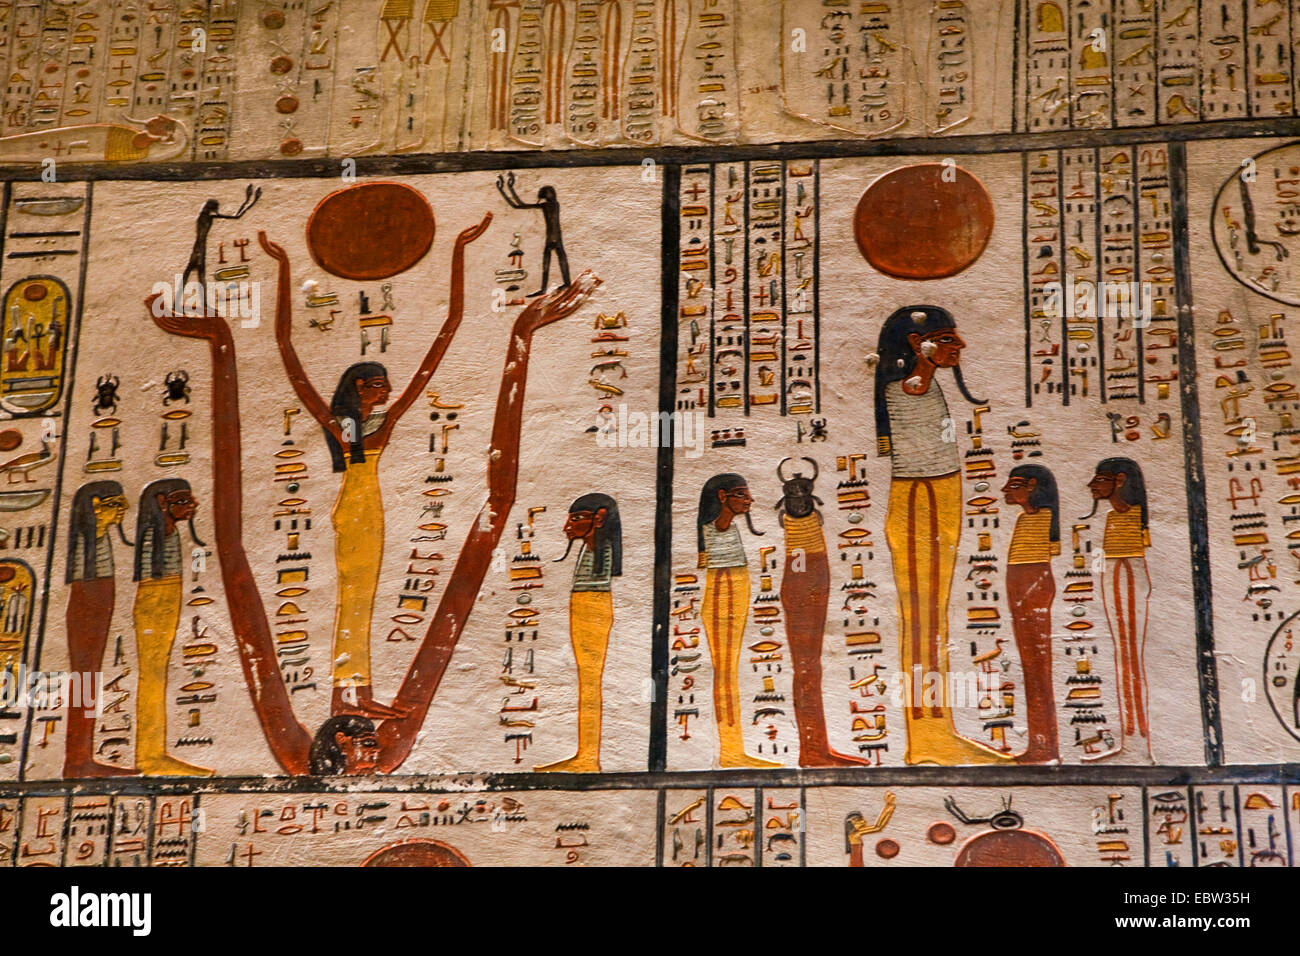 wall paintings and hieroglyphics in the chamber tomb of Ramses V. (1150-1145 BC) and Ramses VI. (1145-1137 BC), Egypt, Valley of the Kings, Luxor Stock Photo